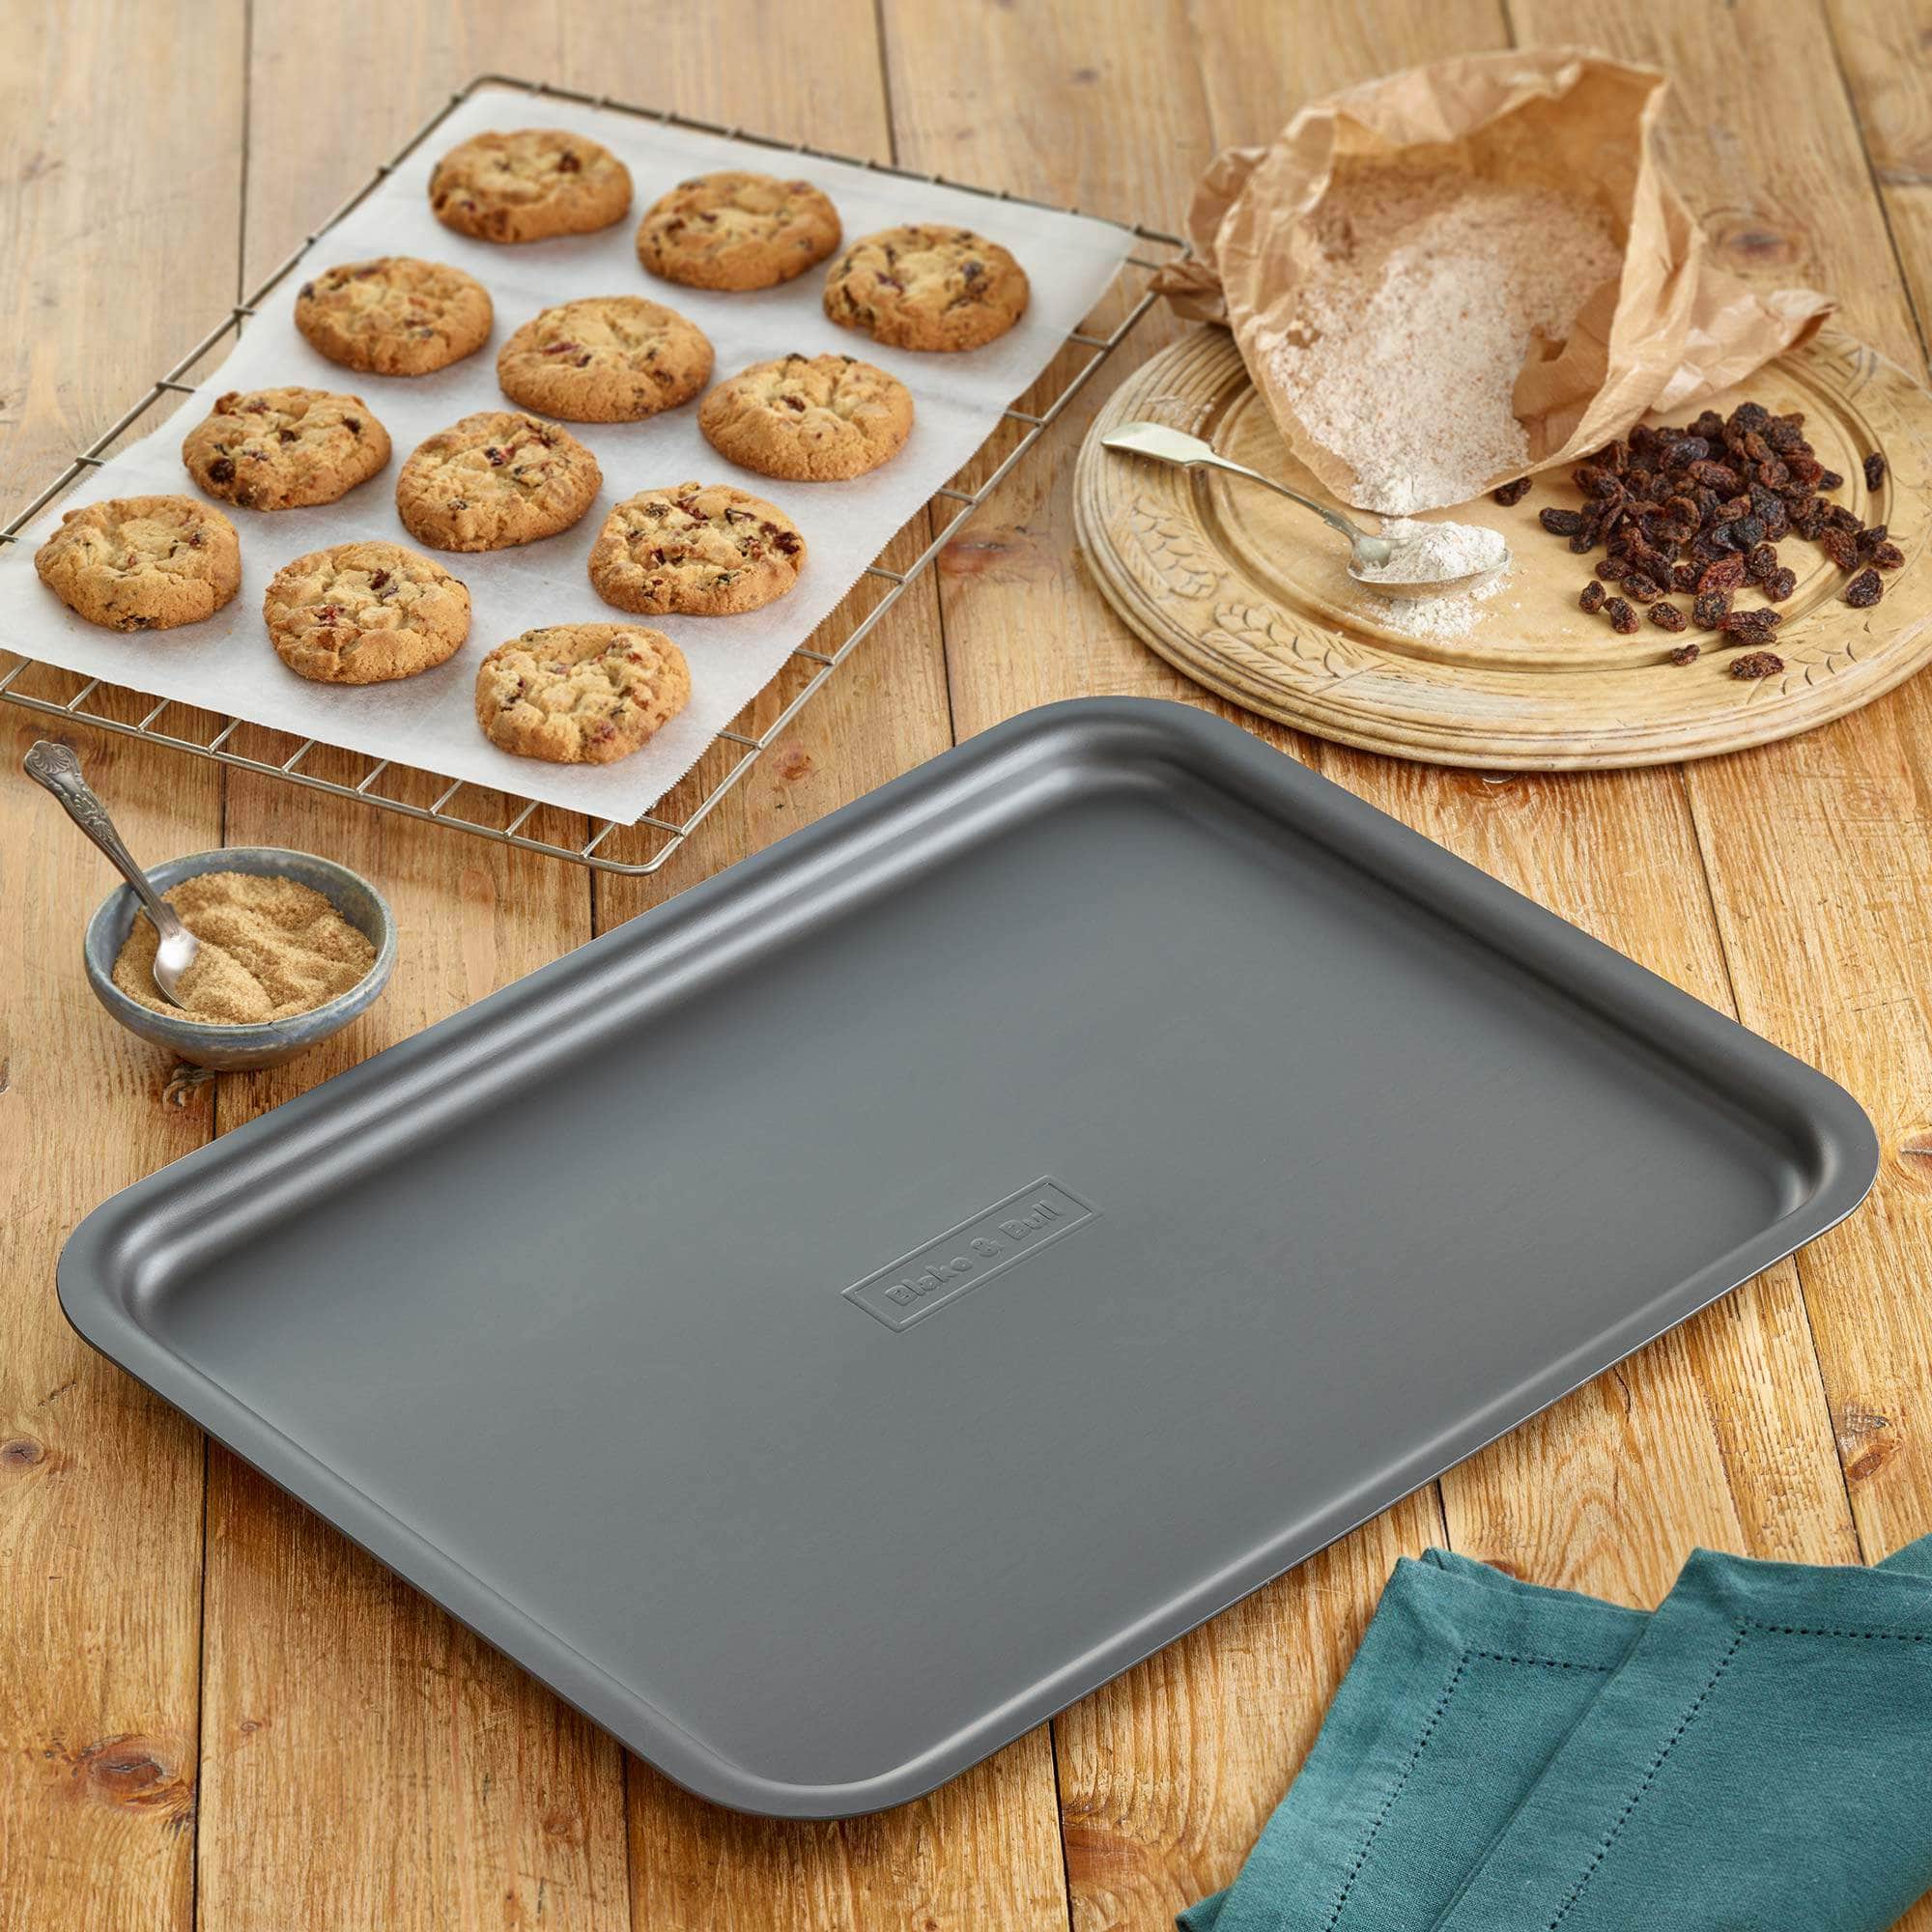 Full-Size Aga baking tray - 'fits on runners